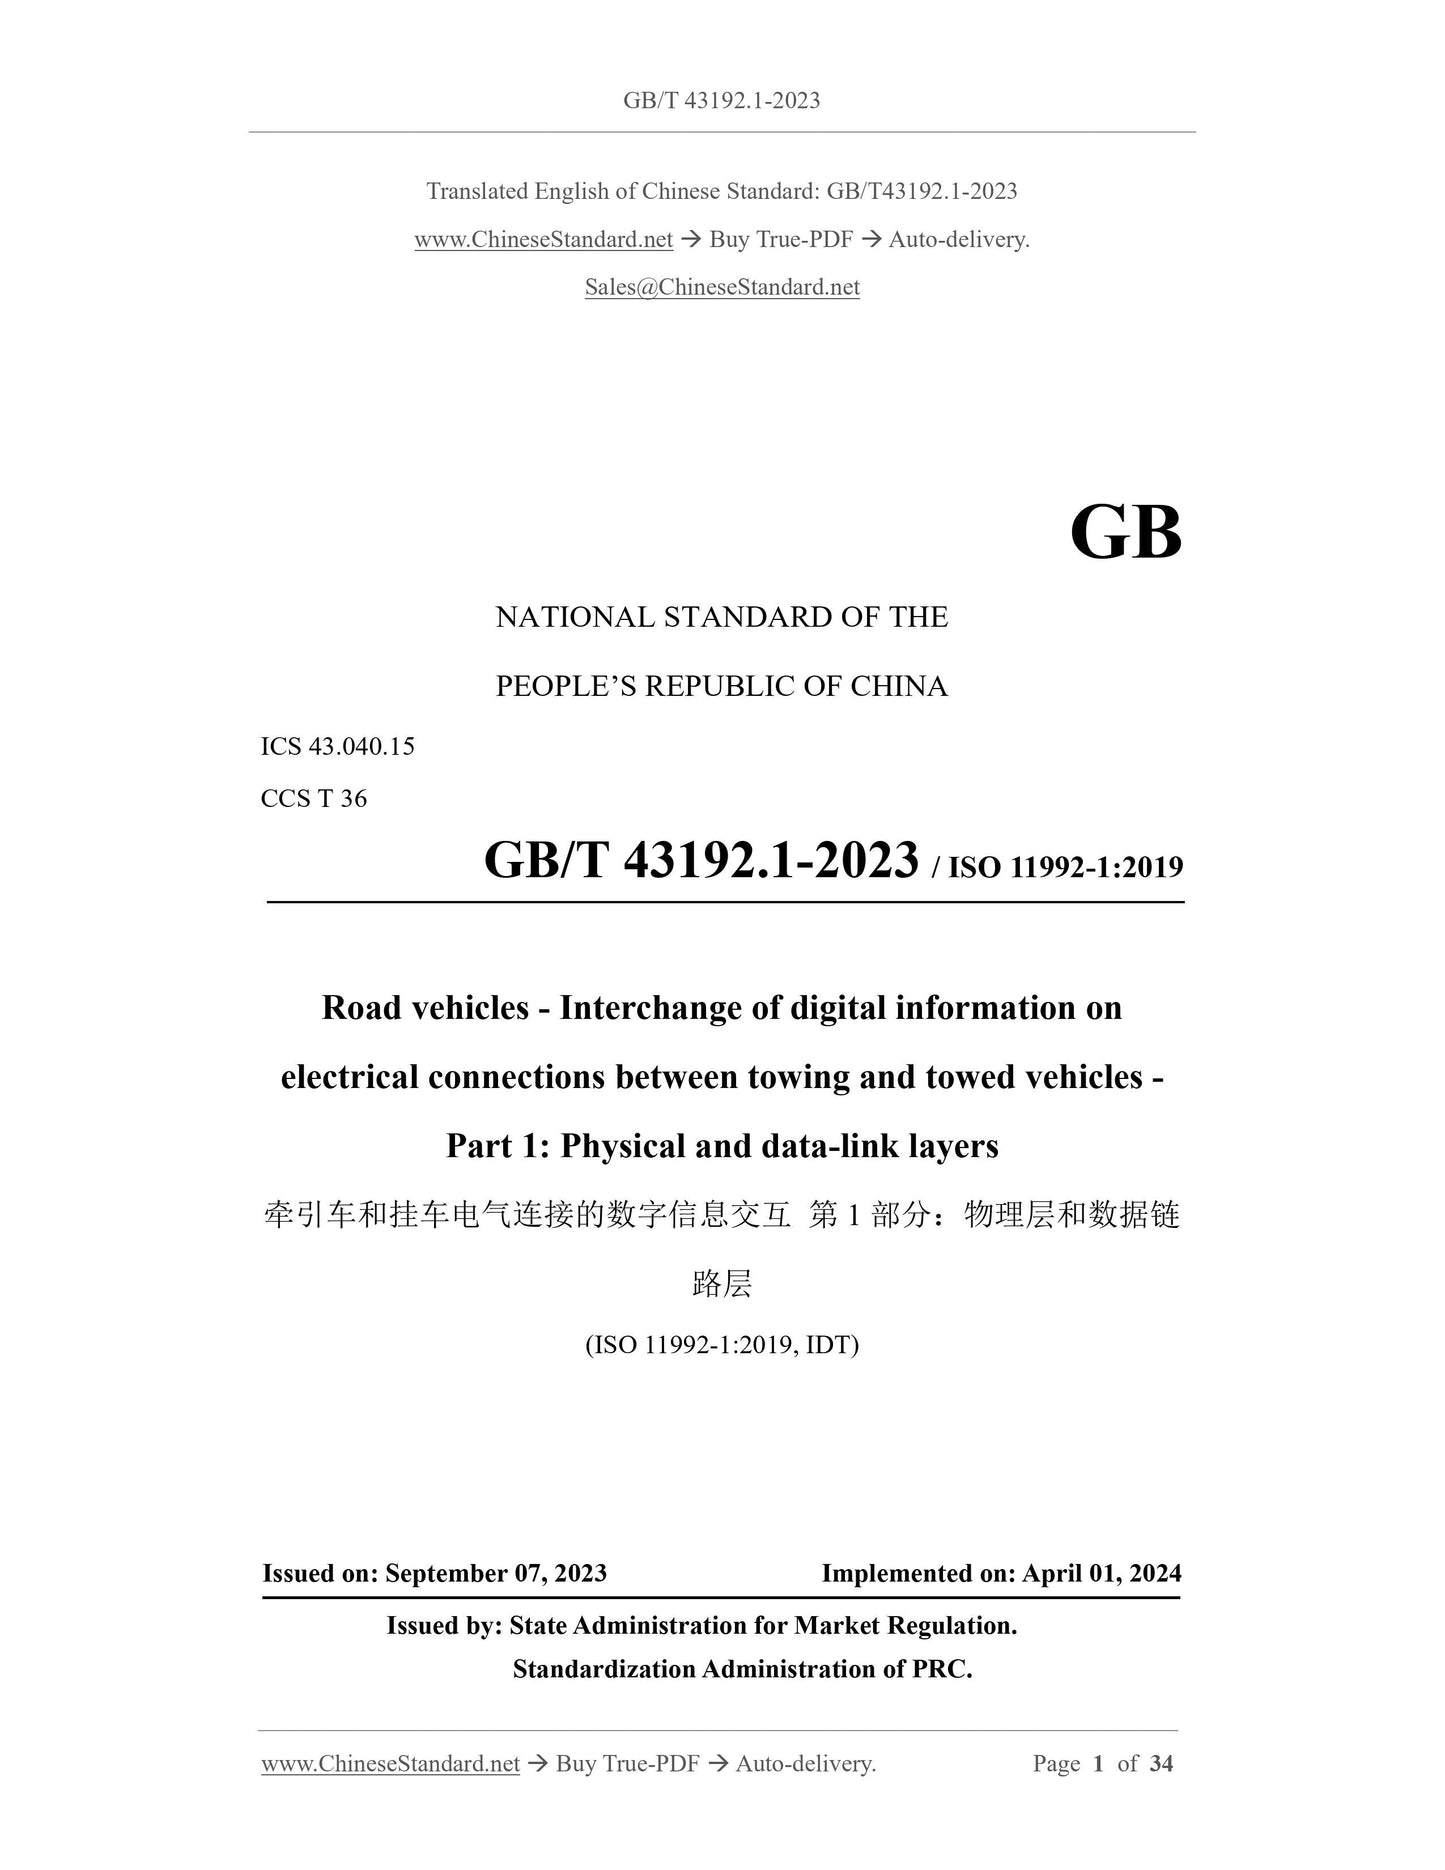 GB/T 43192.1-2023 Page 1